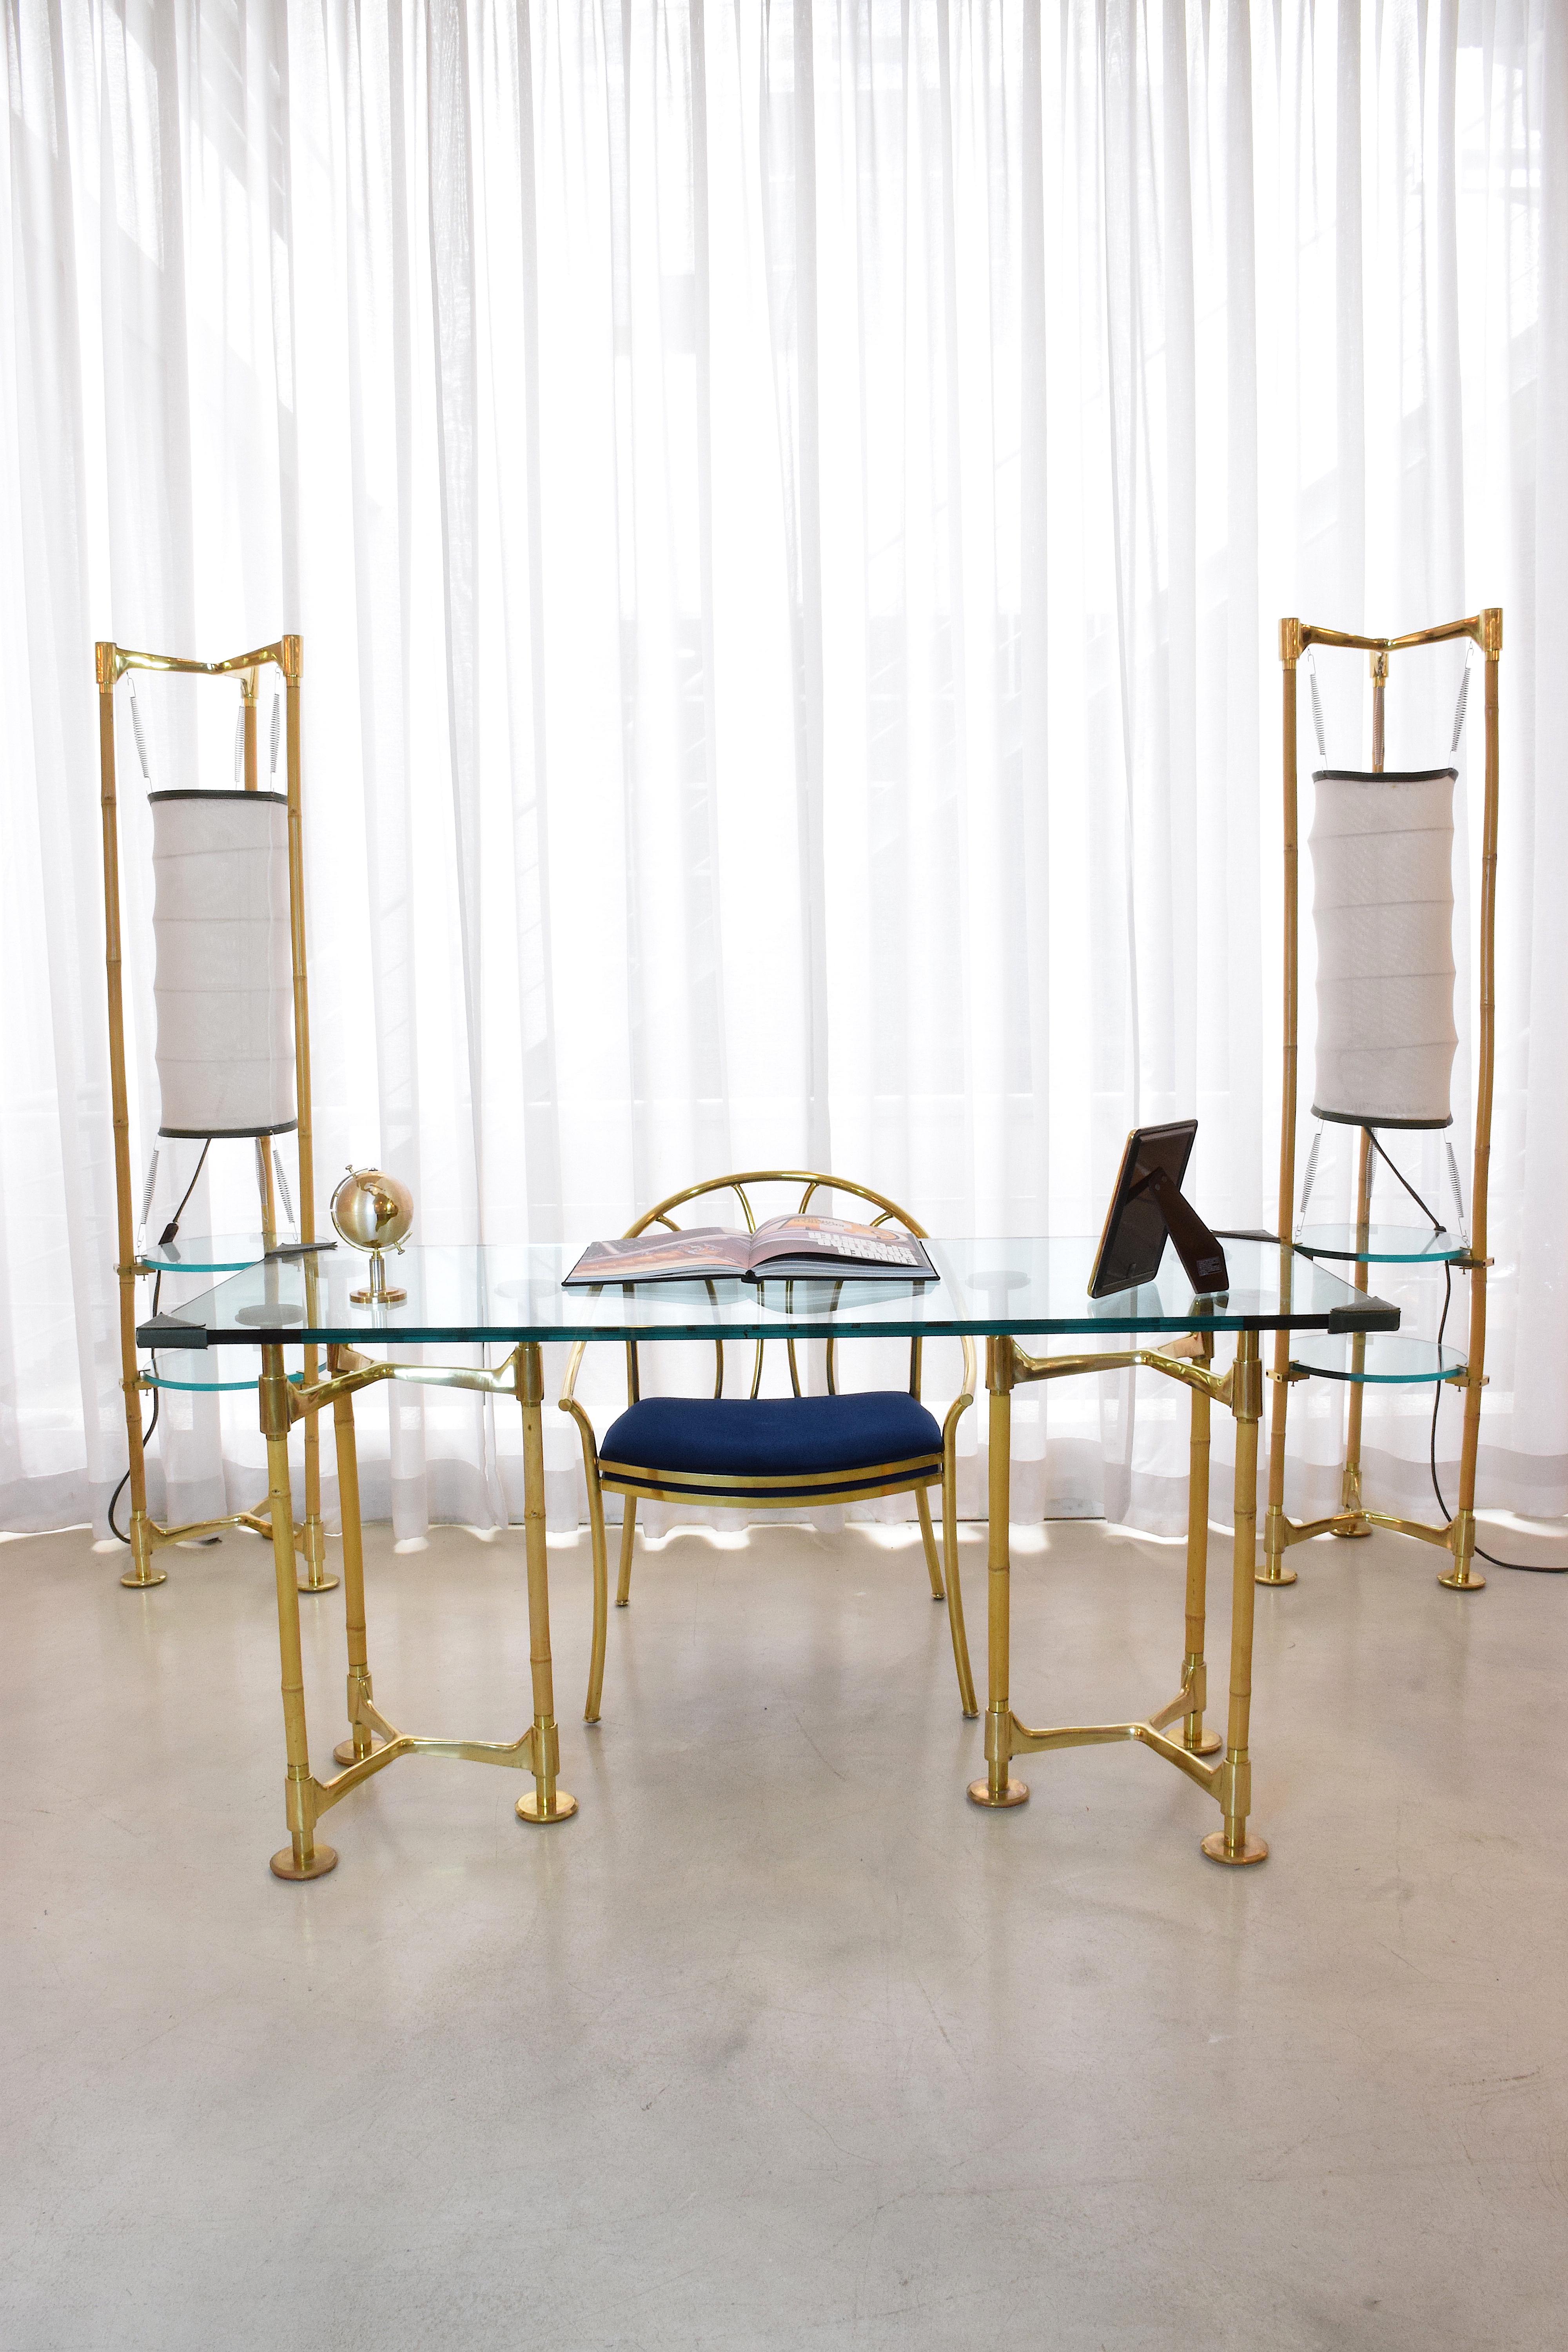 A stunning 20th century vintage rectangular desk composed of two tripod feet built out of gold polished brass and bamboo with circular disk endings. The tabletop is a 2cm thick glass and is adorned with leather stitched endings for